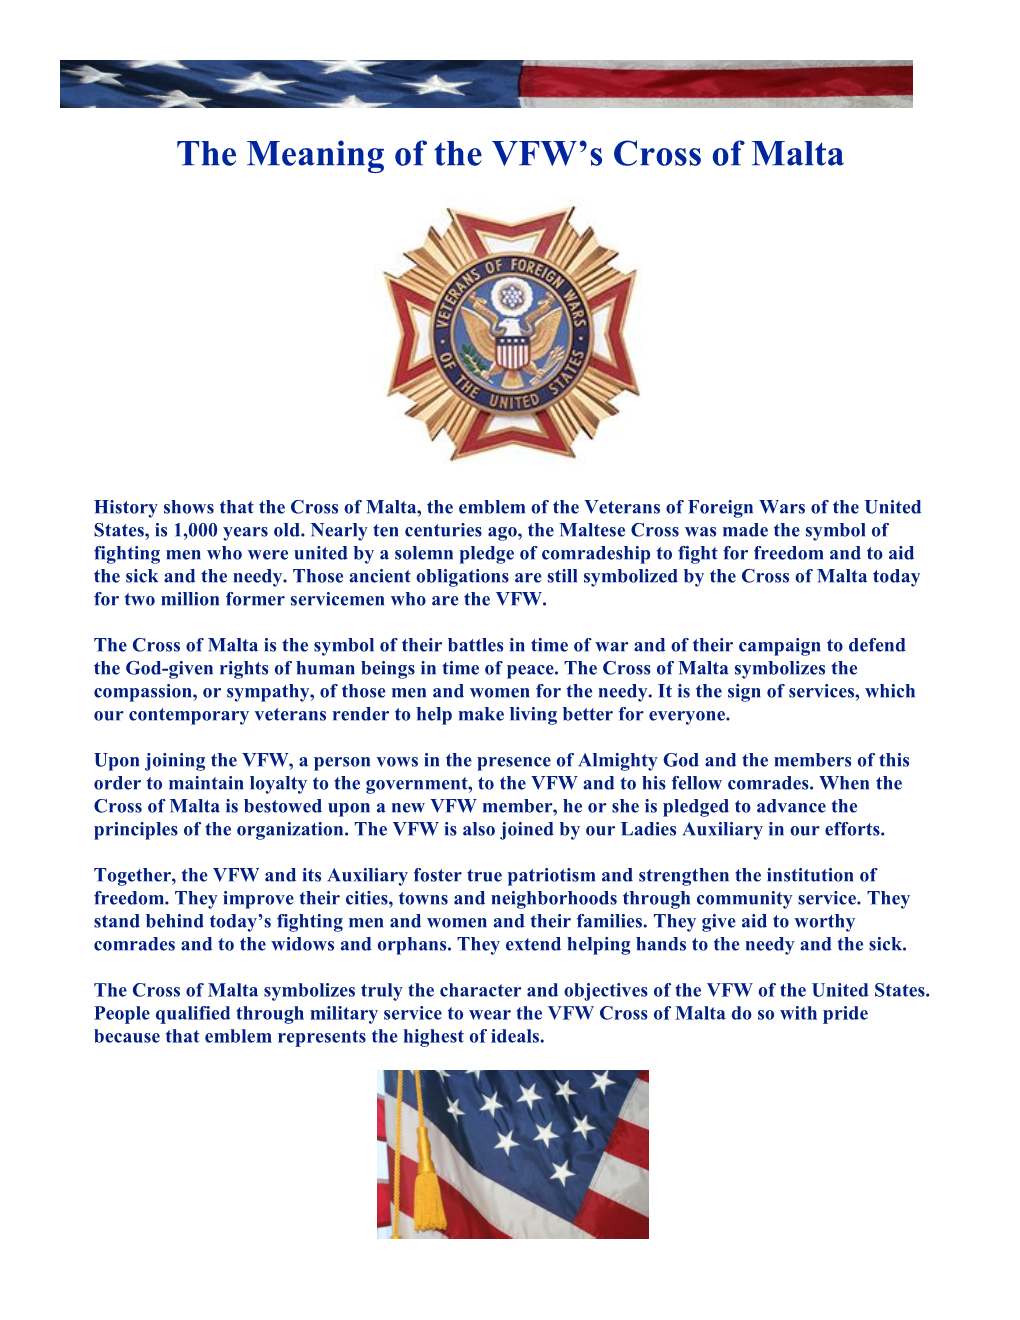 The Meaning of the VFW's Cross of Malta